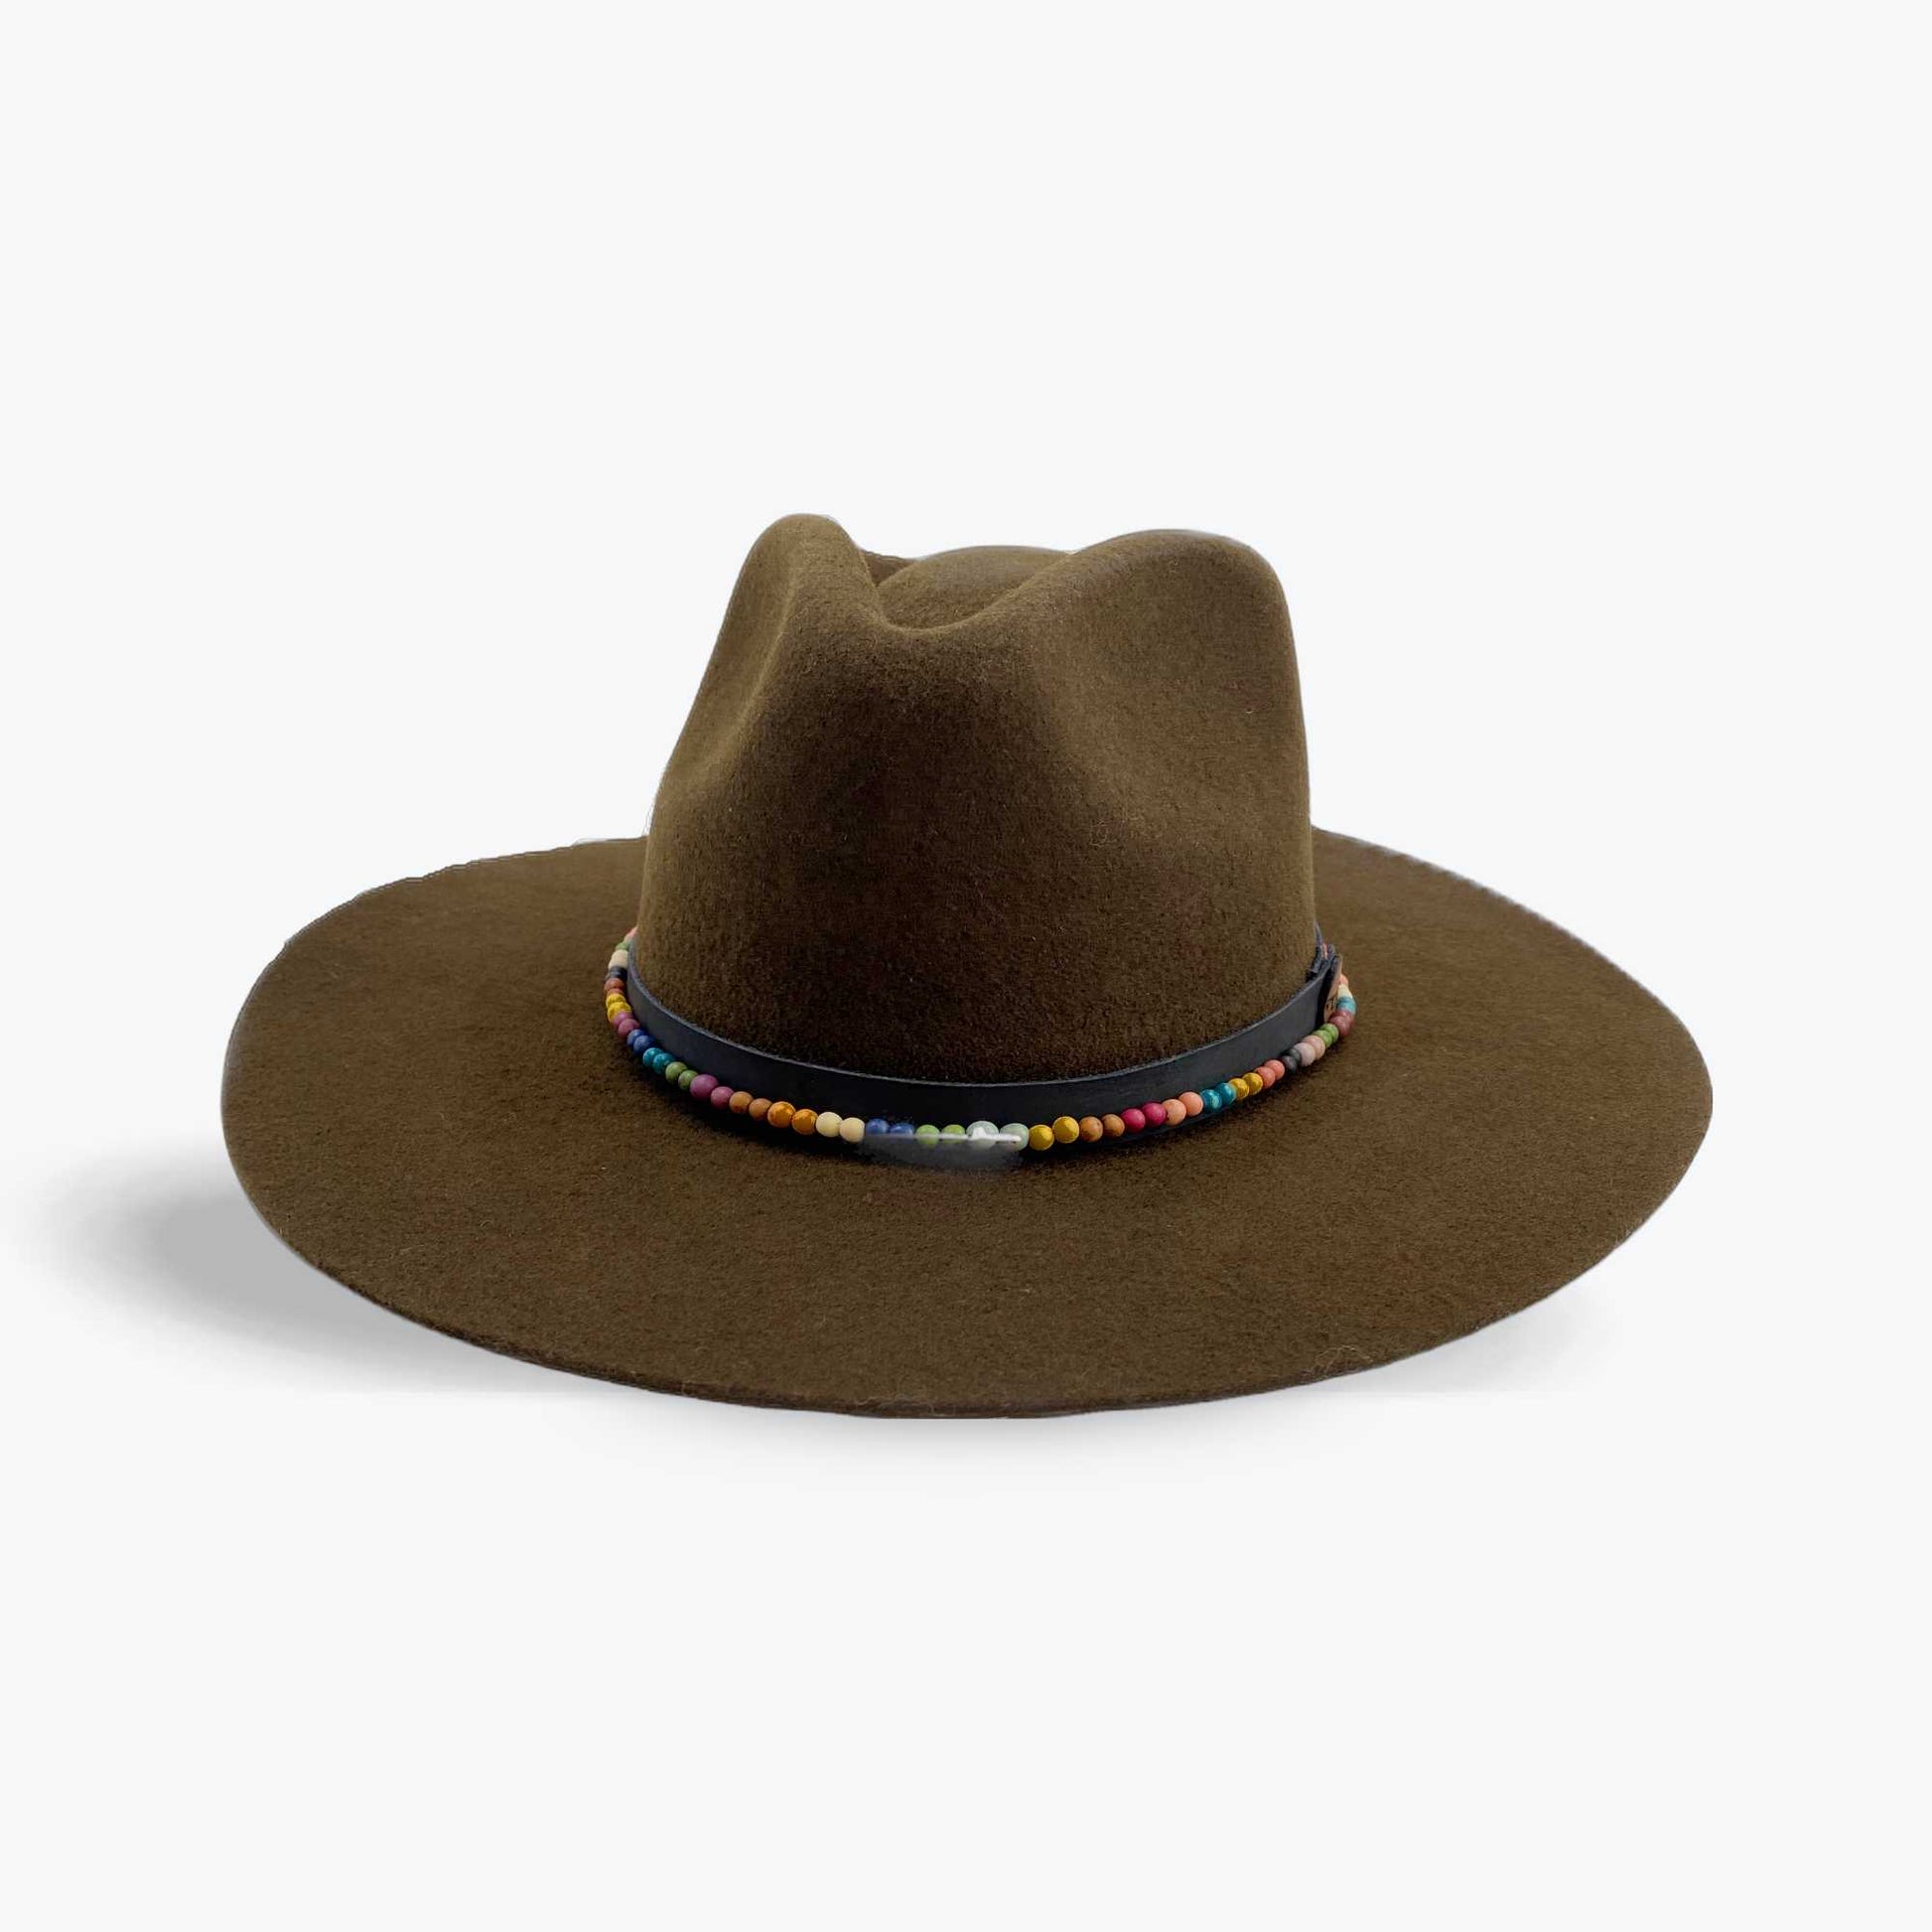 TAGUA NUT HAT BAND The Hip Hat